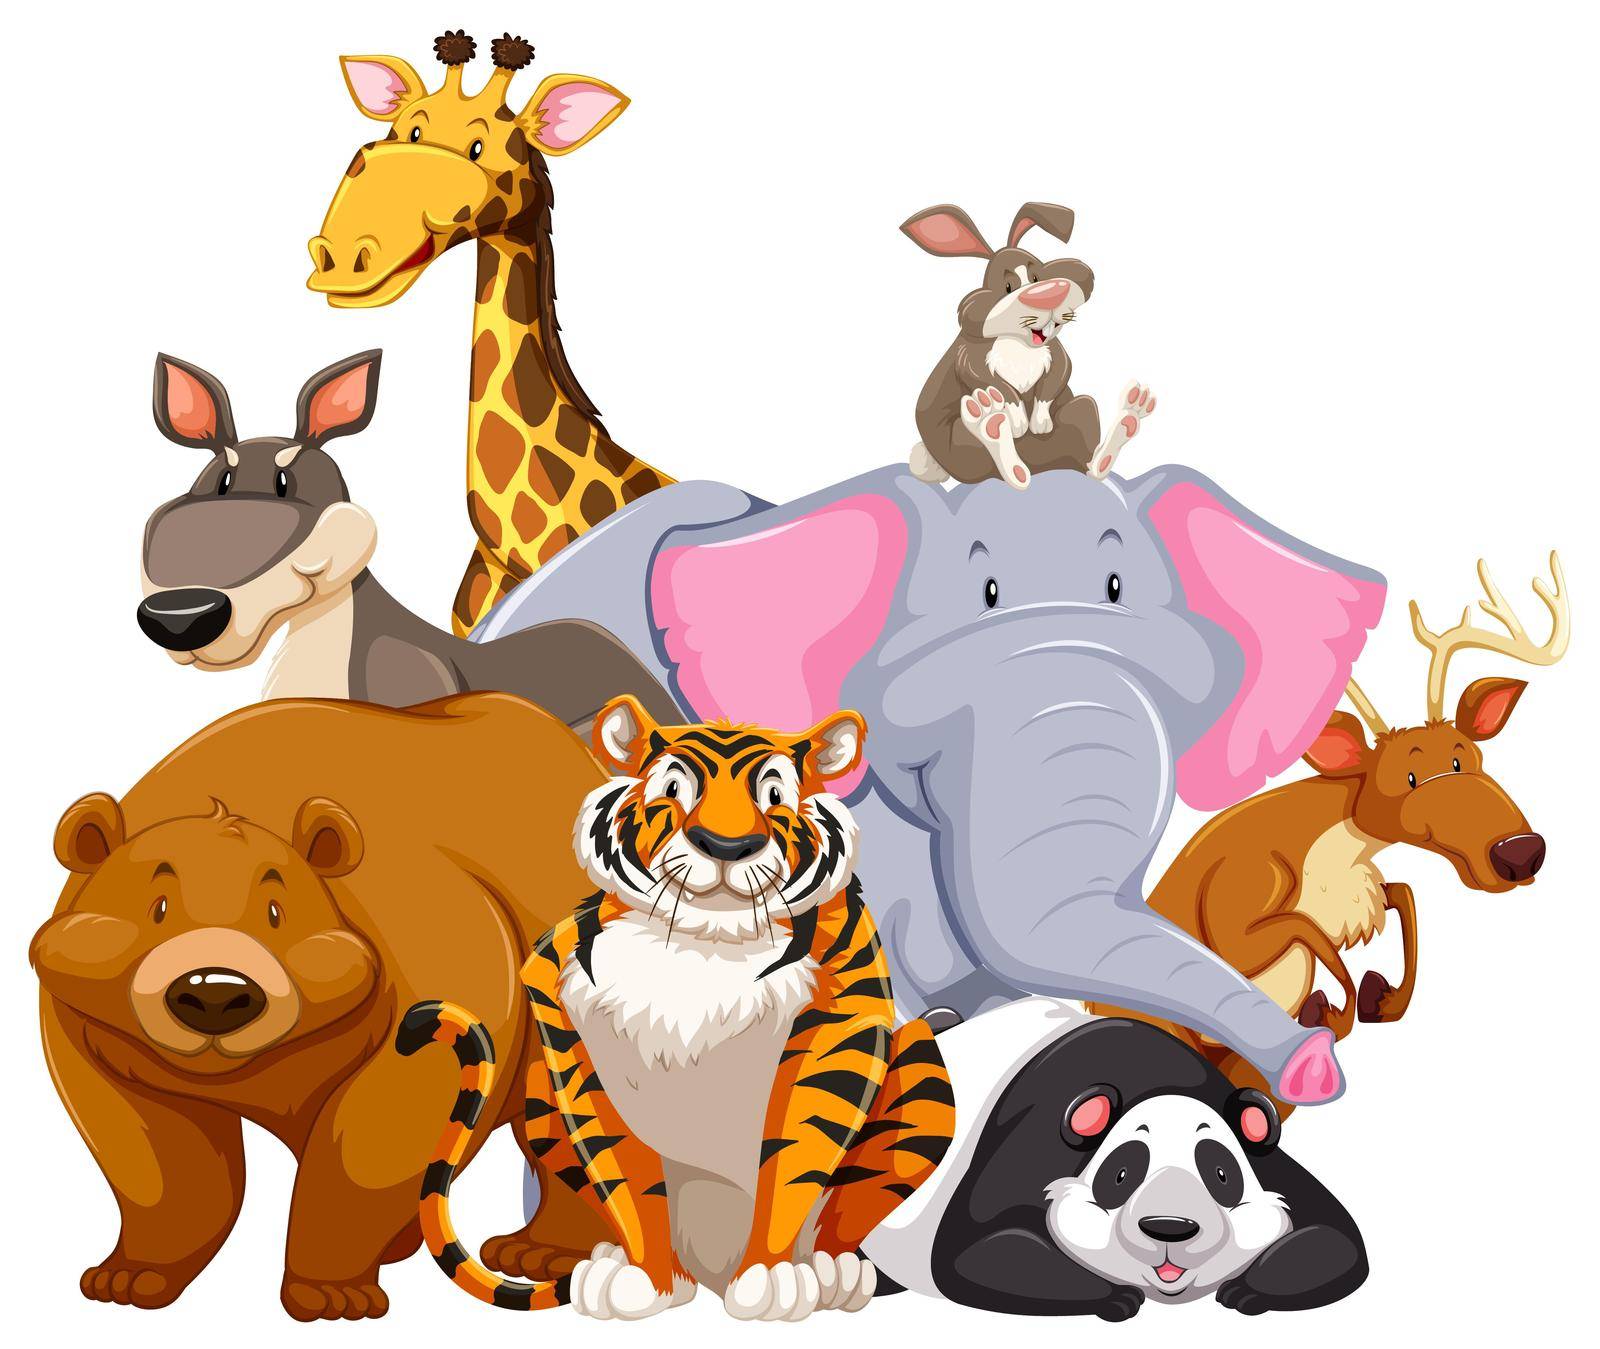 Animals characters on white illustration